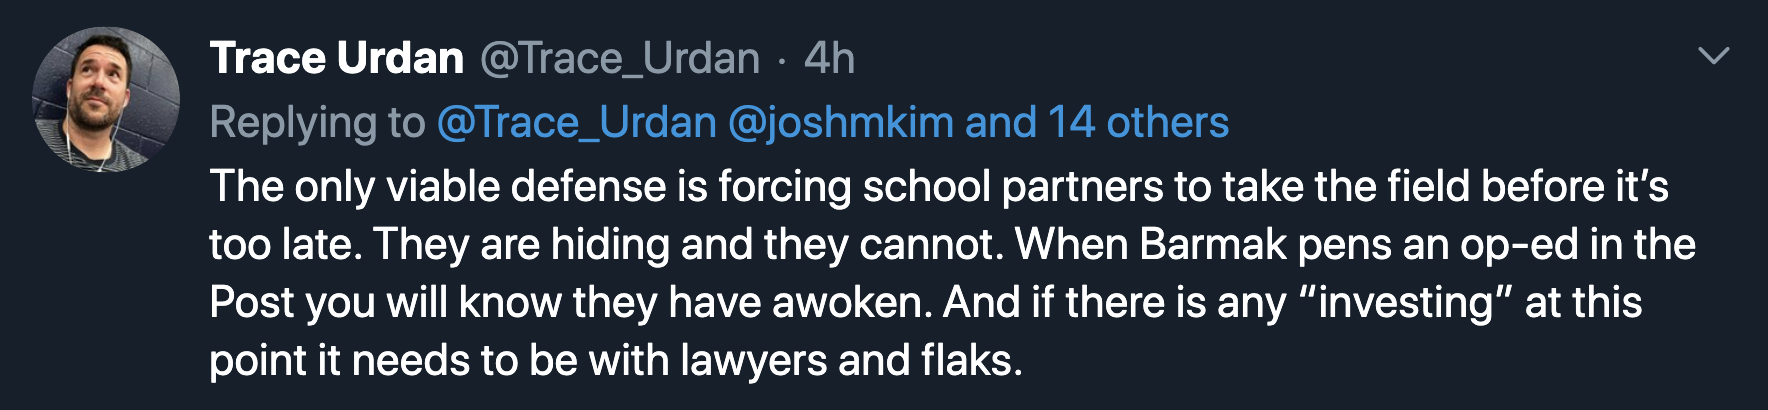 The only viable defense is forcing school partners to take the field before it's too late. They are hiding and they cannot. When Barmak pens an op-ed in the Post you will know they have awoken. And if there is any "investing" at this point it needs to be with lawyers and flacks.